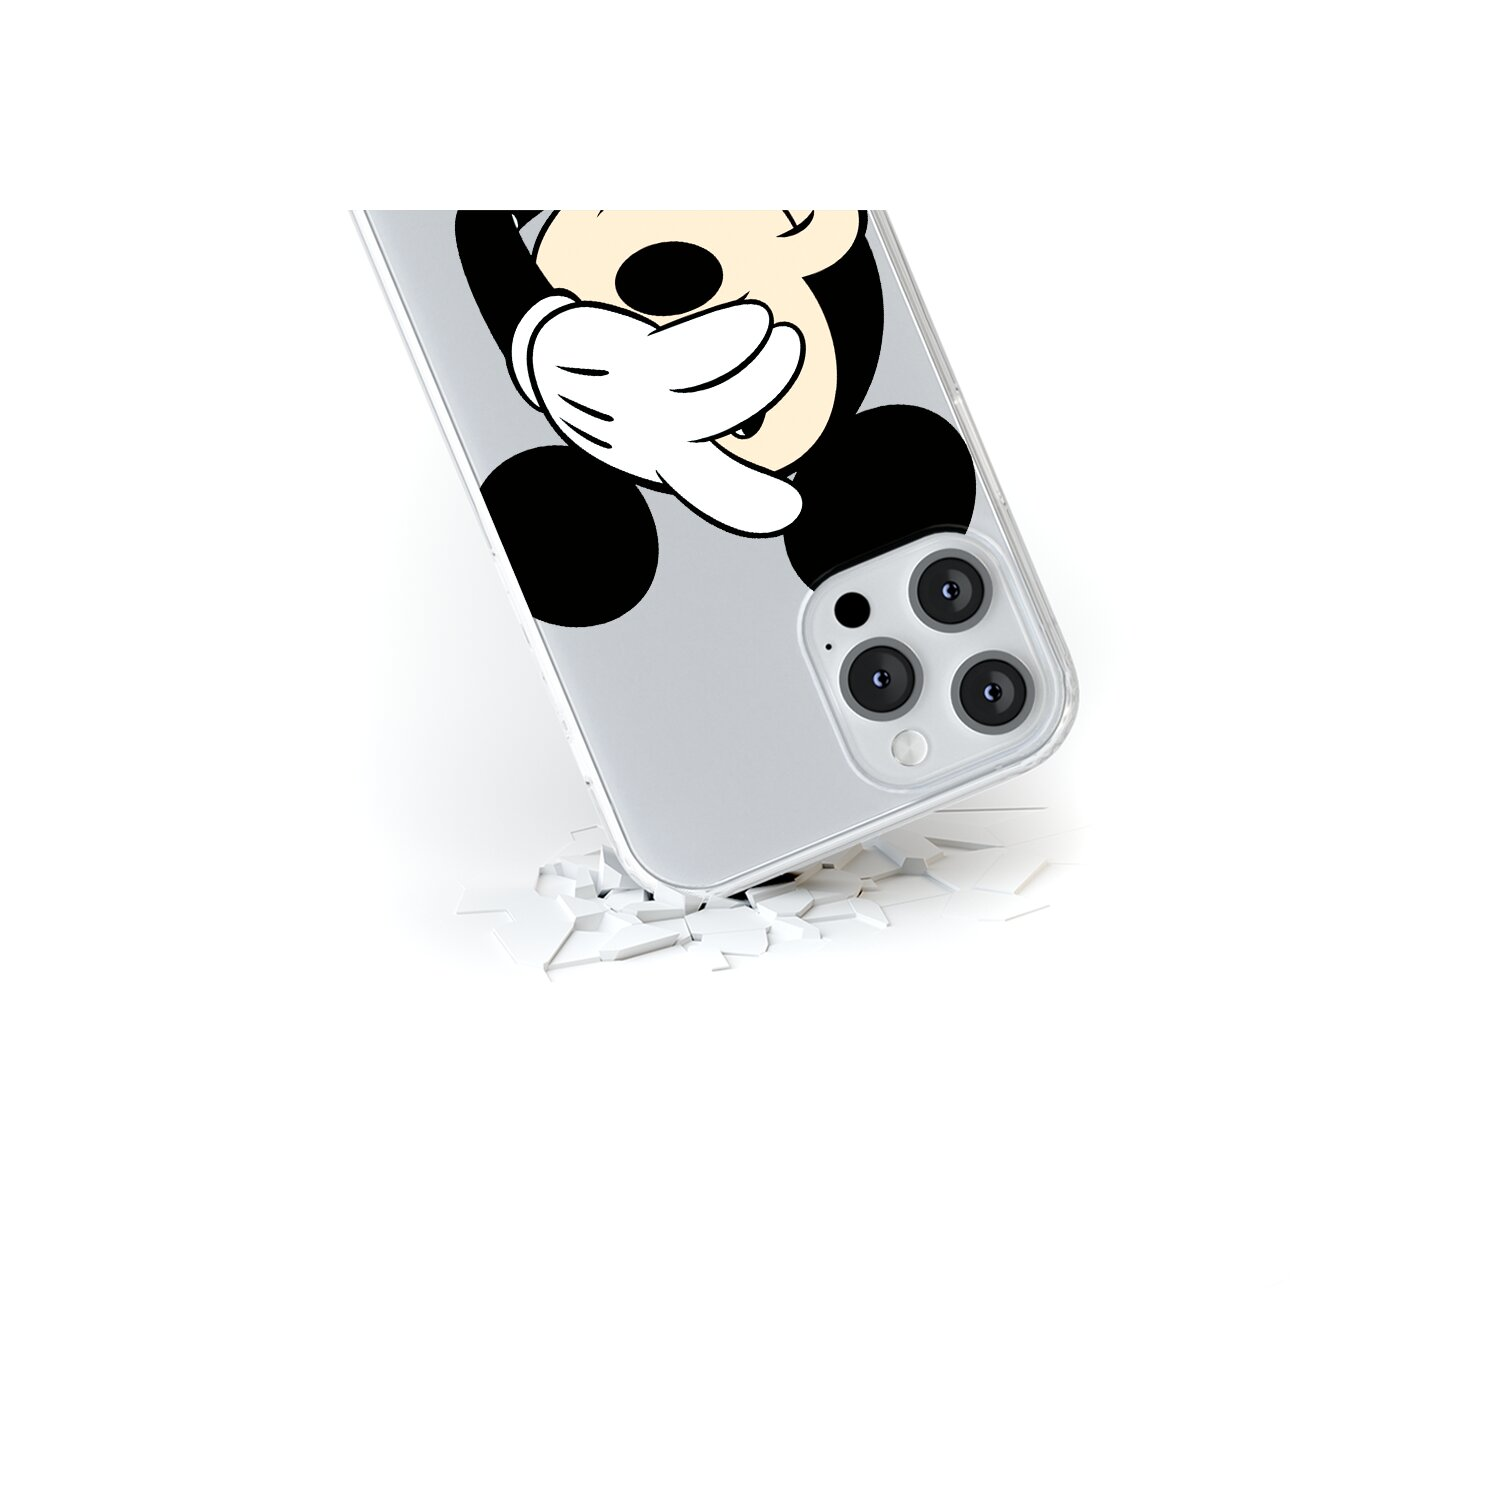 Apple, 003 Mickey Max, Partial DISNEY Pro 14 Print, Transparent iPhone Backcover,